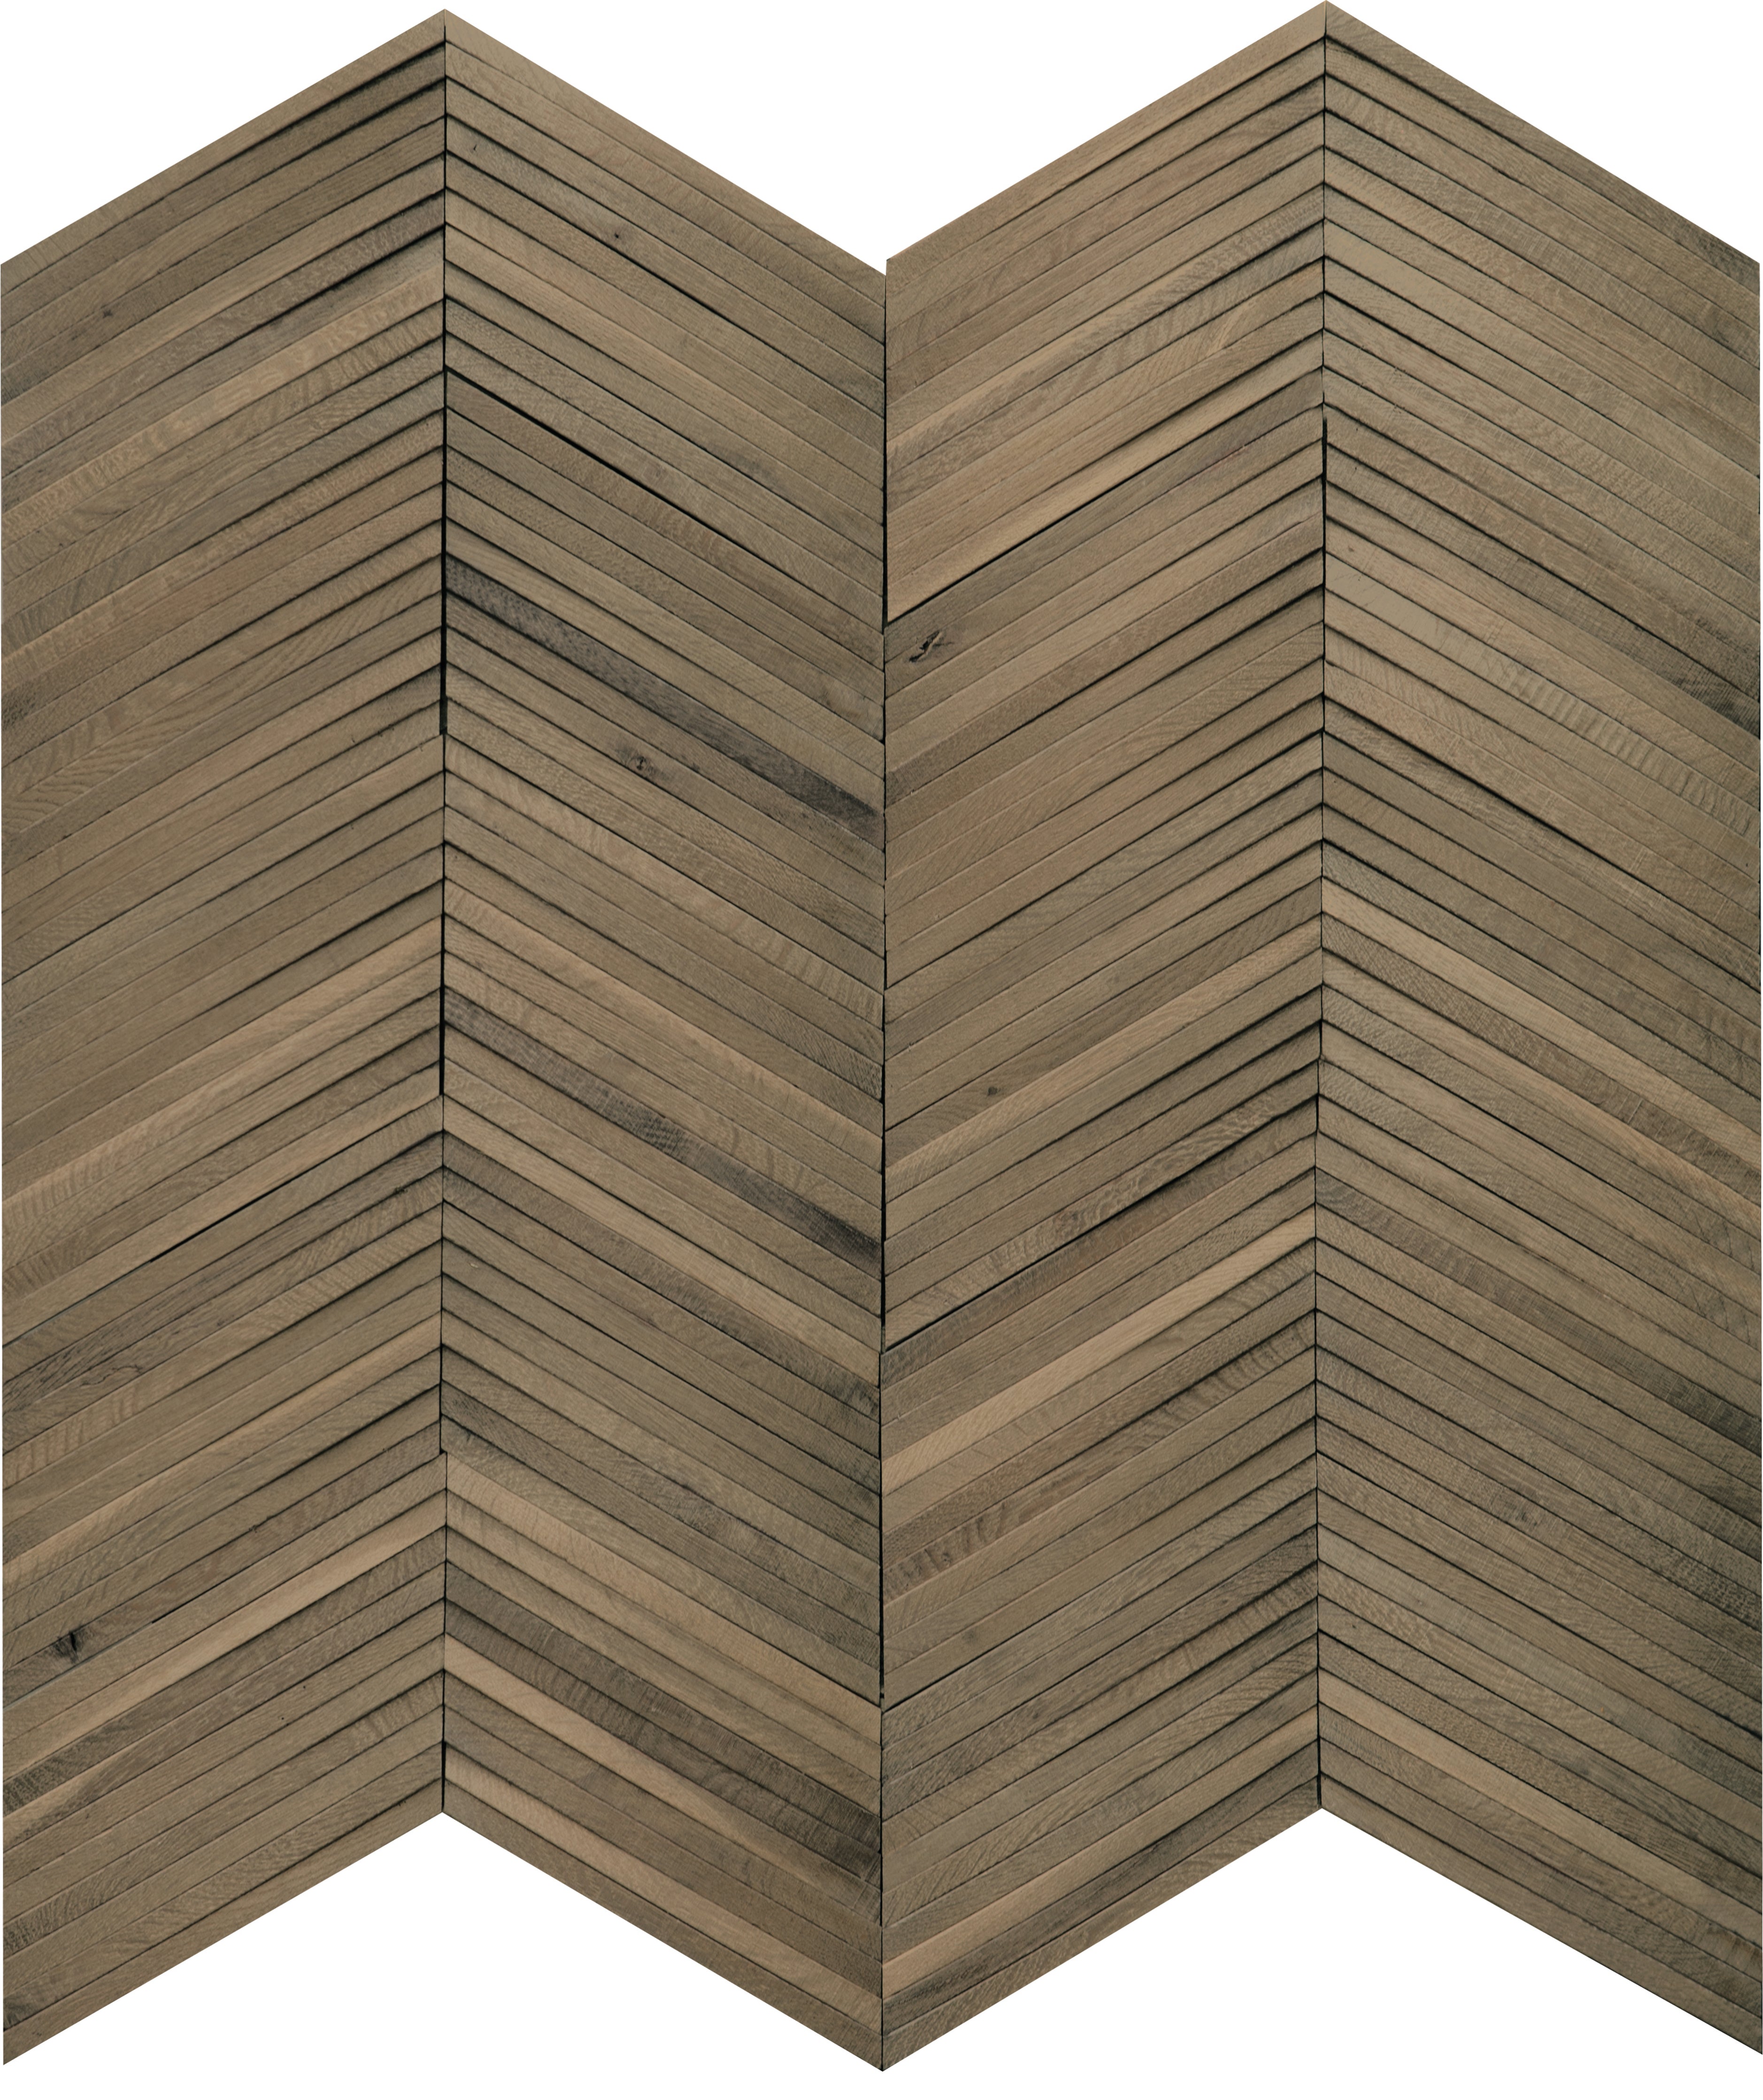 duchateau inceptiv ark chevron smoke oak three dimensional wall natural wood panel matte lacquer for interior use distributed by surface group international